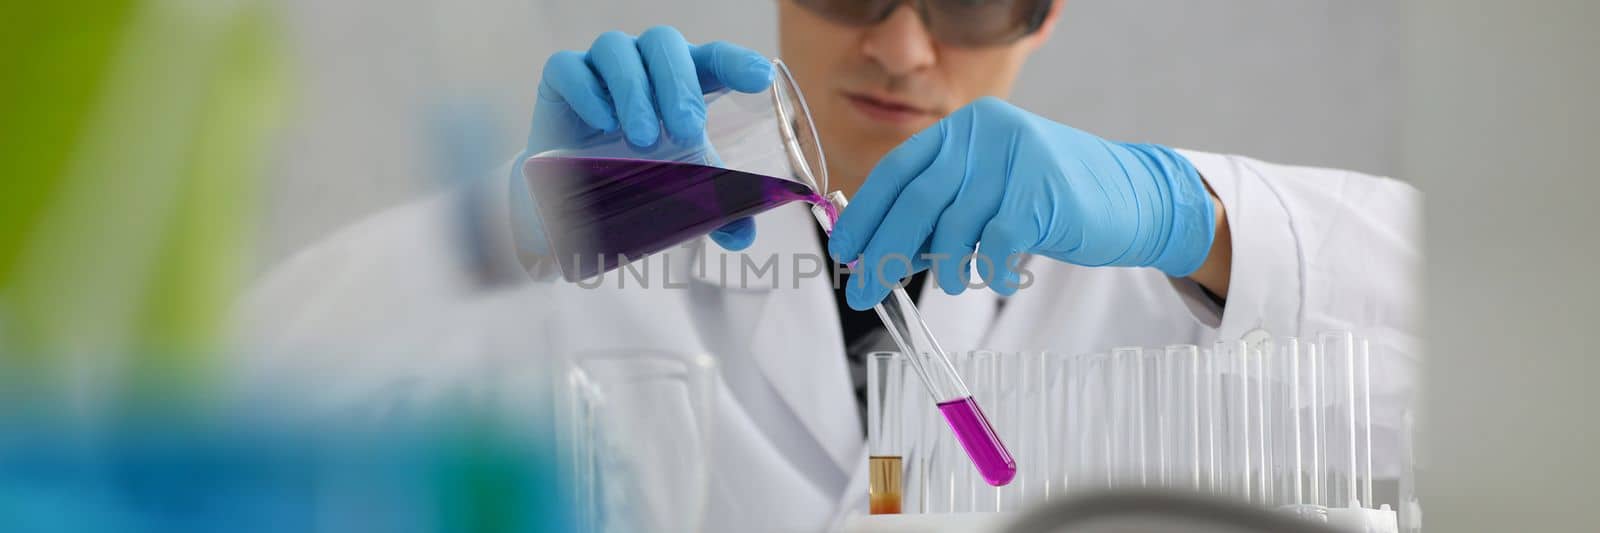 Scientist in protective gloves holding test tube of purple liquid by kuprevich